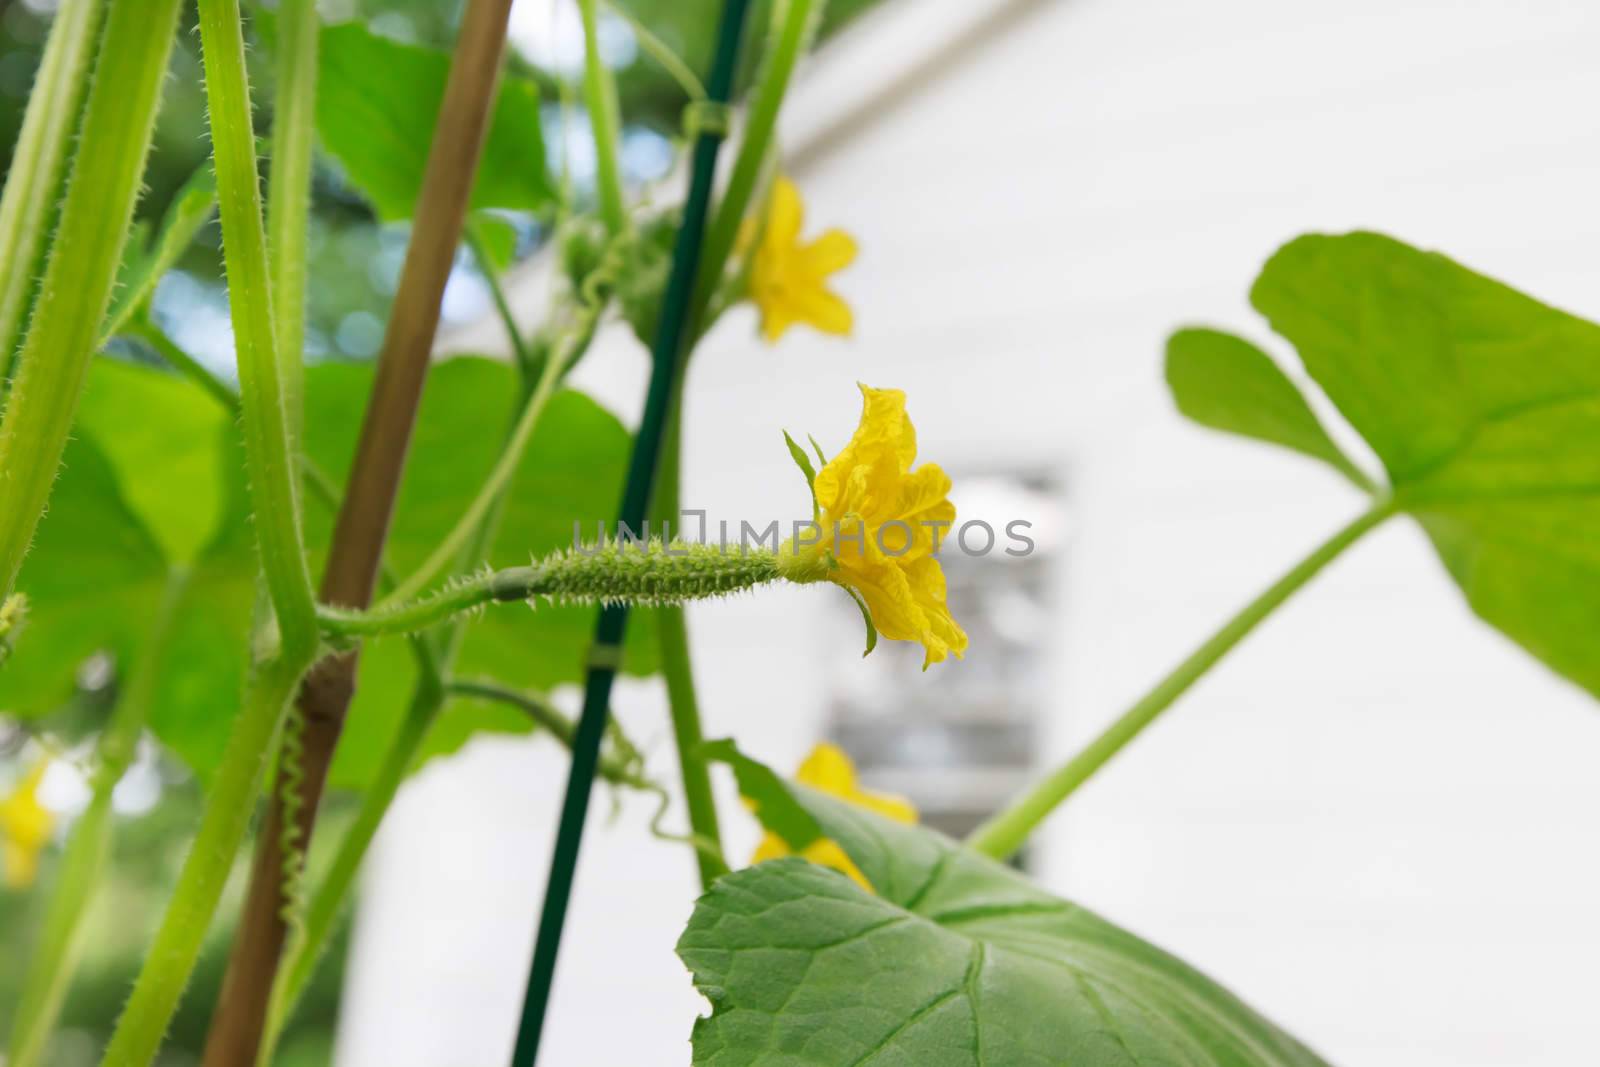 Young cucumber with flowers in a garden by melpomene